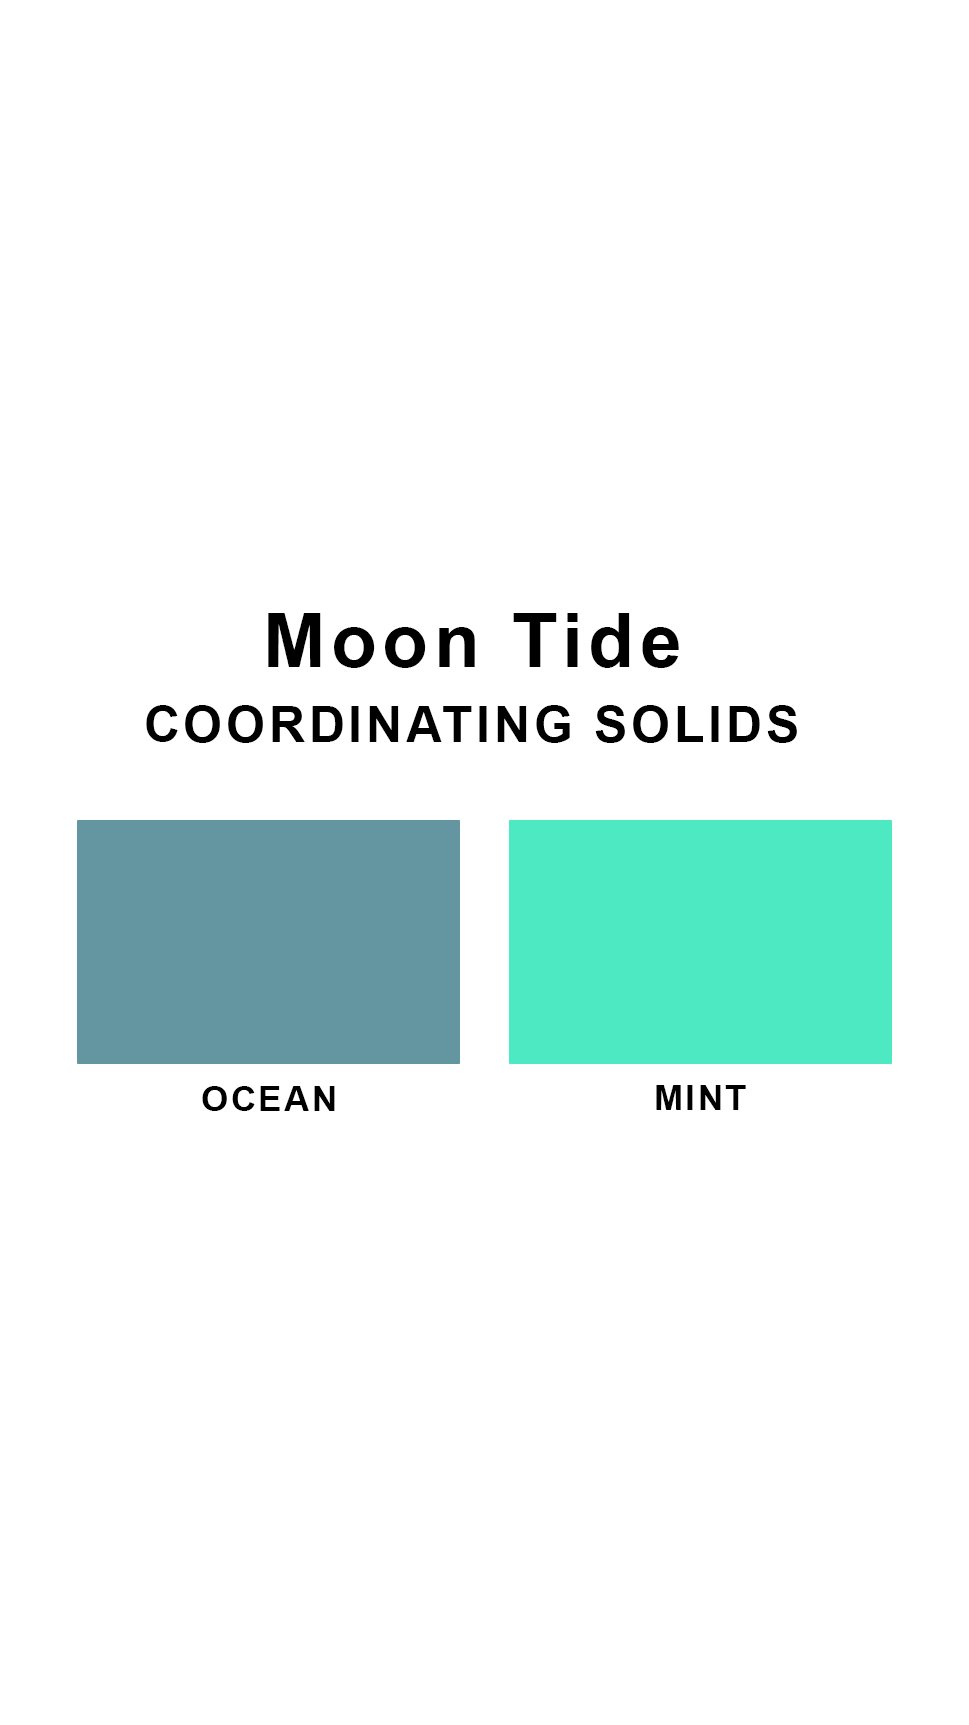 Coordinating solids chart for Sunsets Moontide swimsuit print: Ocean and Mint